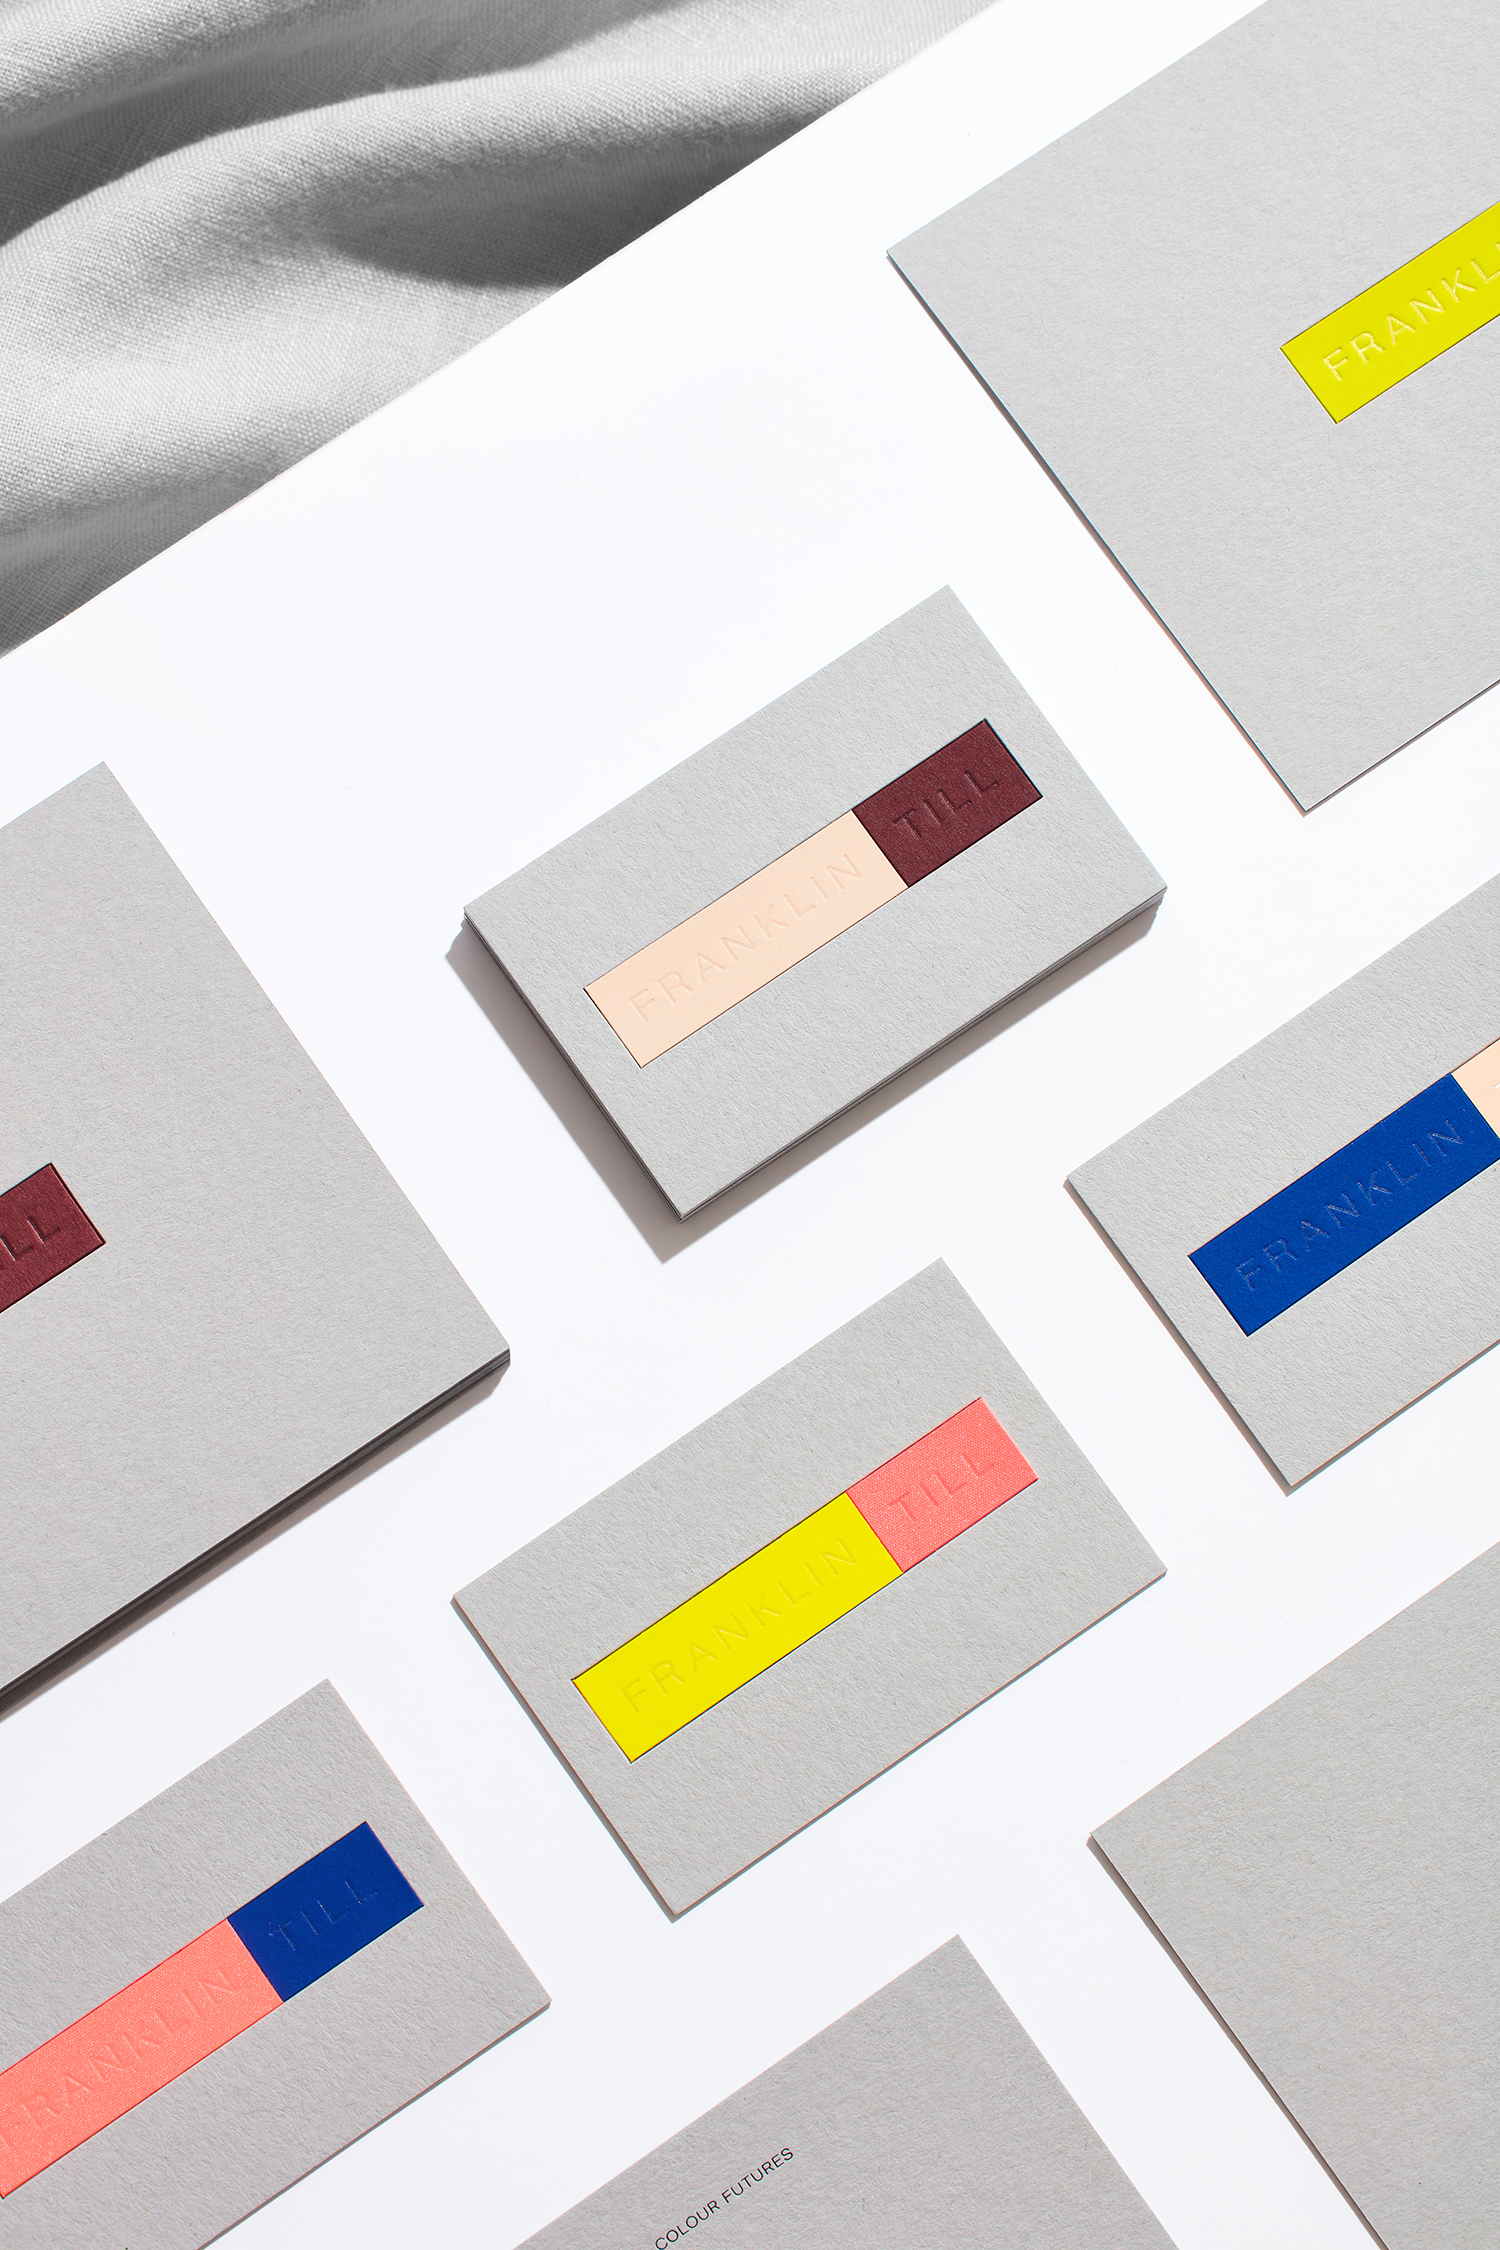 Graphic identity and stationery by Commission for futures research agency FranklinTill